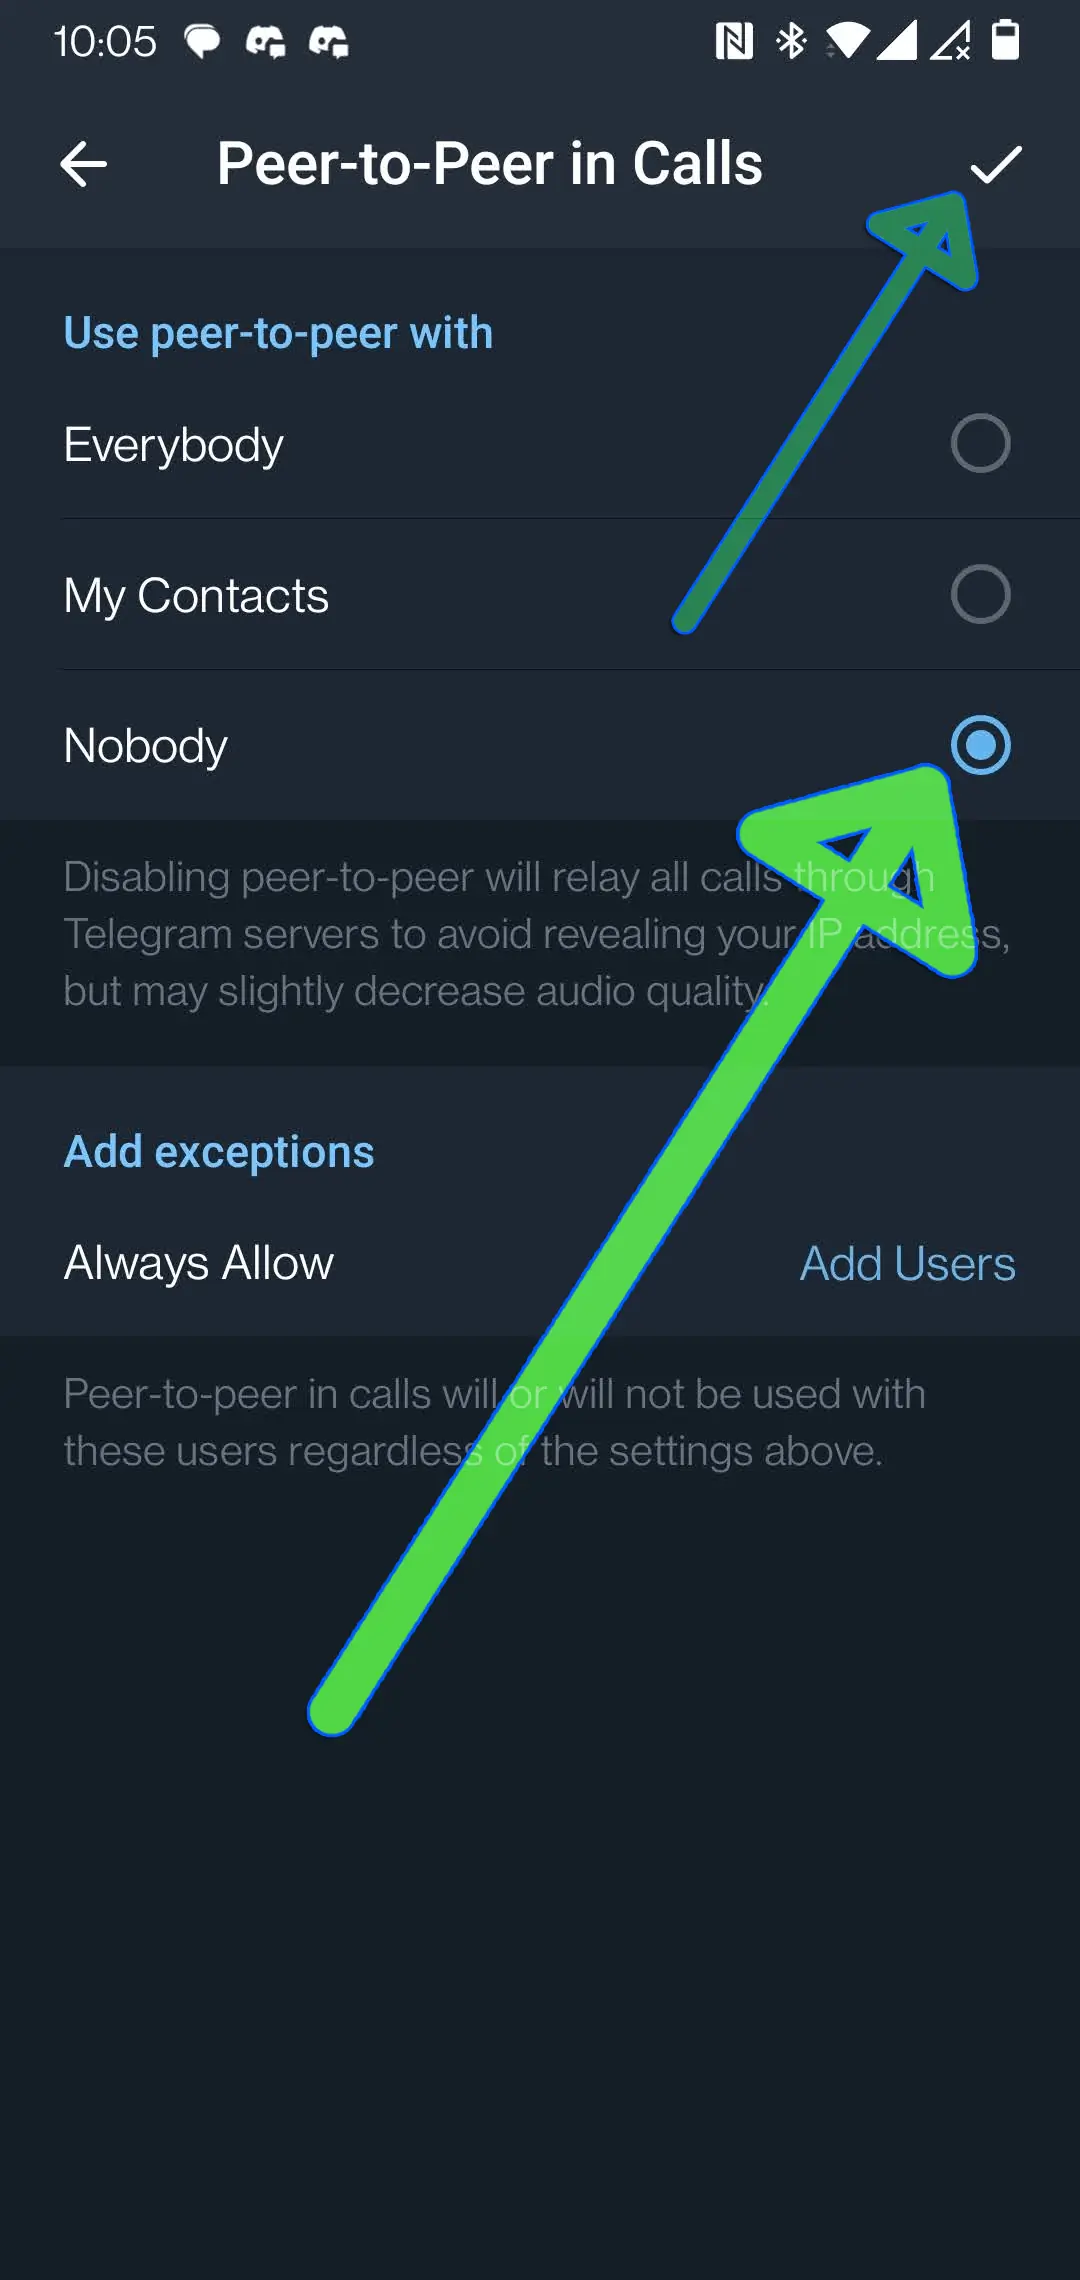 Stay Secure on Telegram with this Buried but Essential Privacy Option